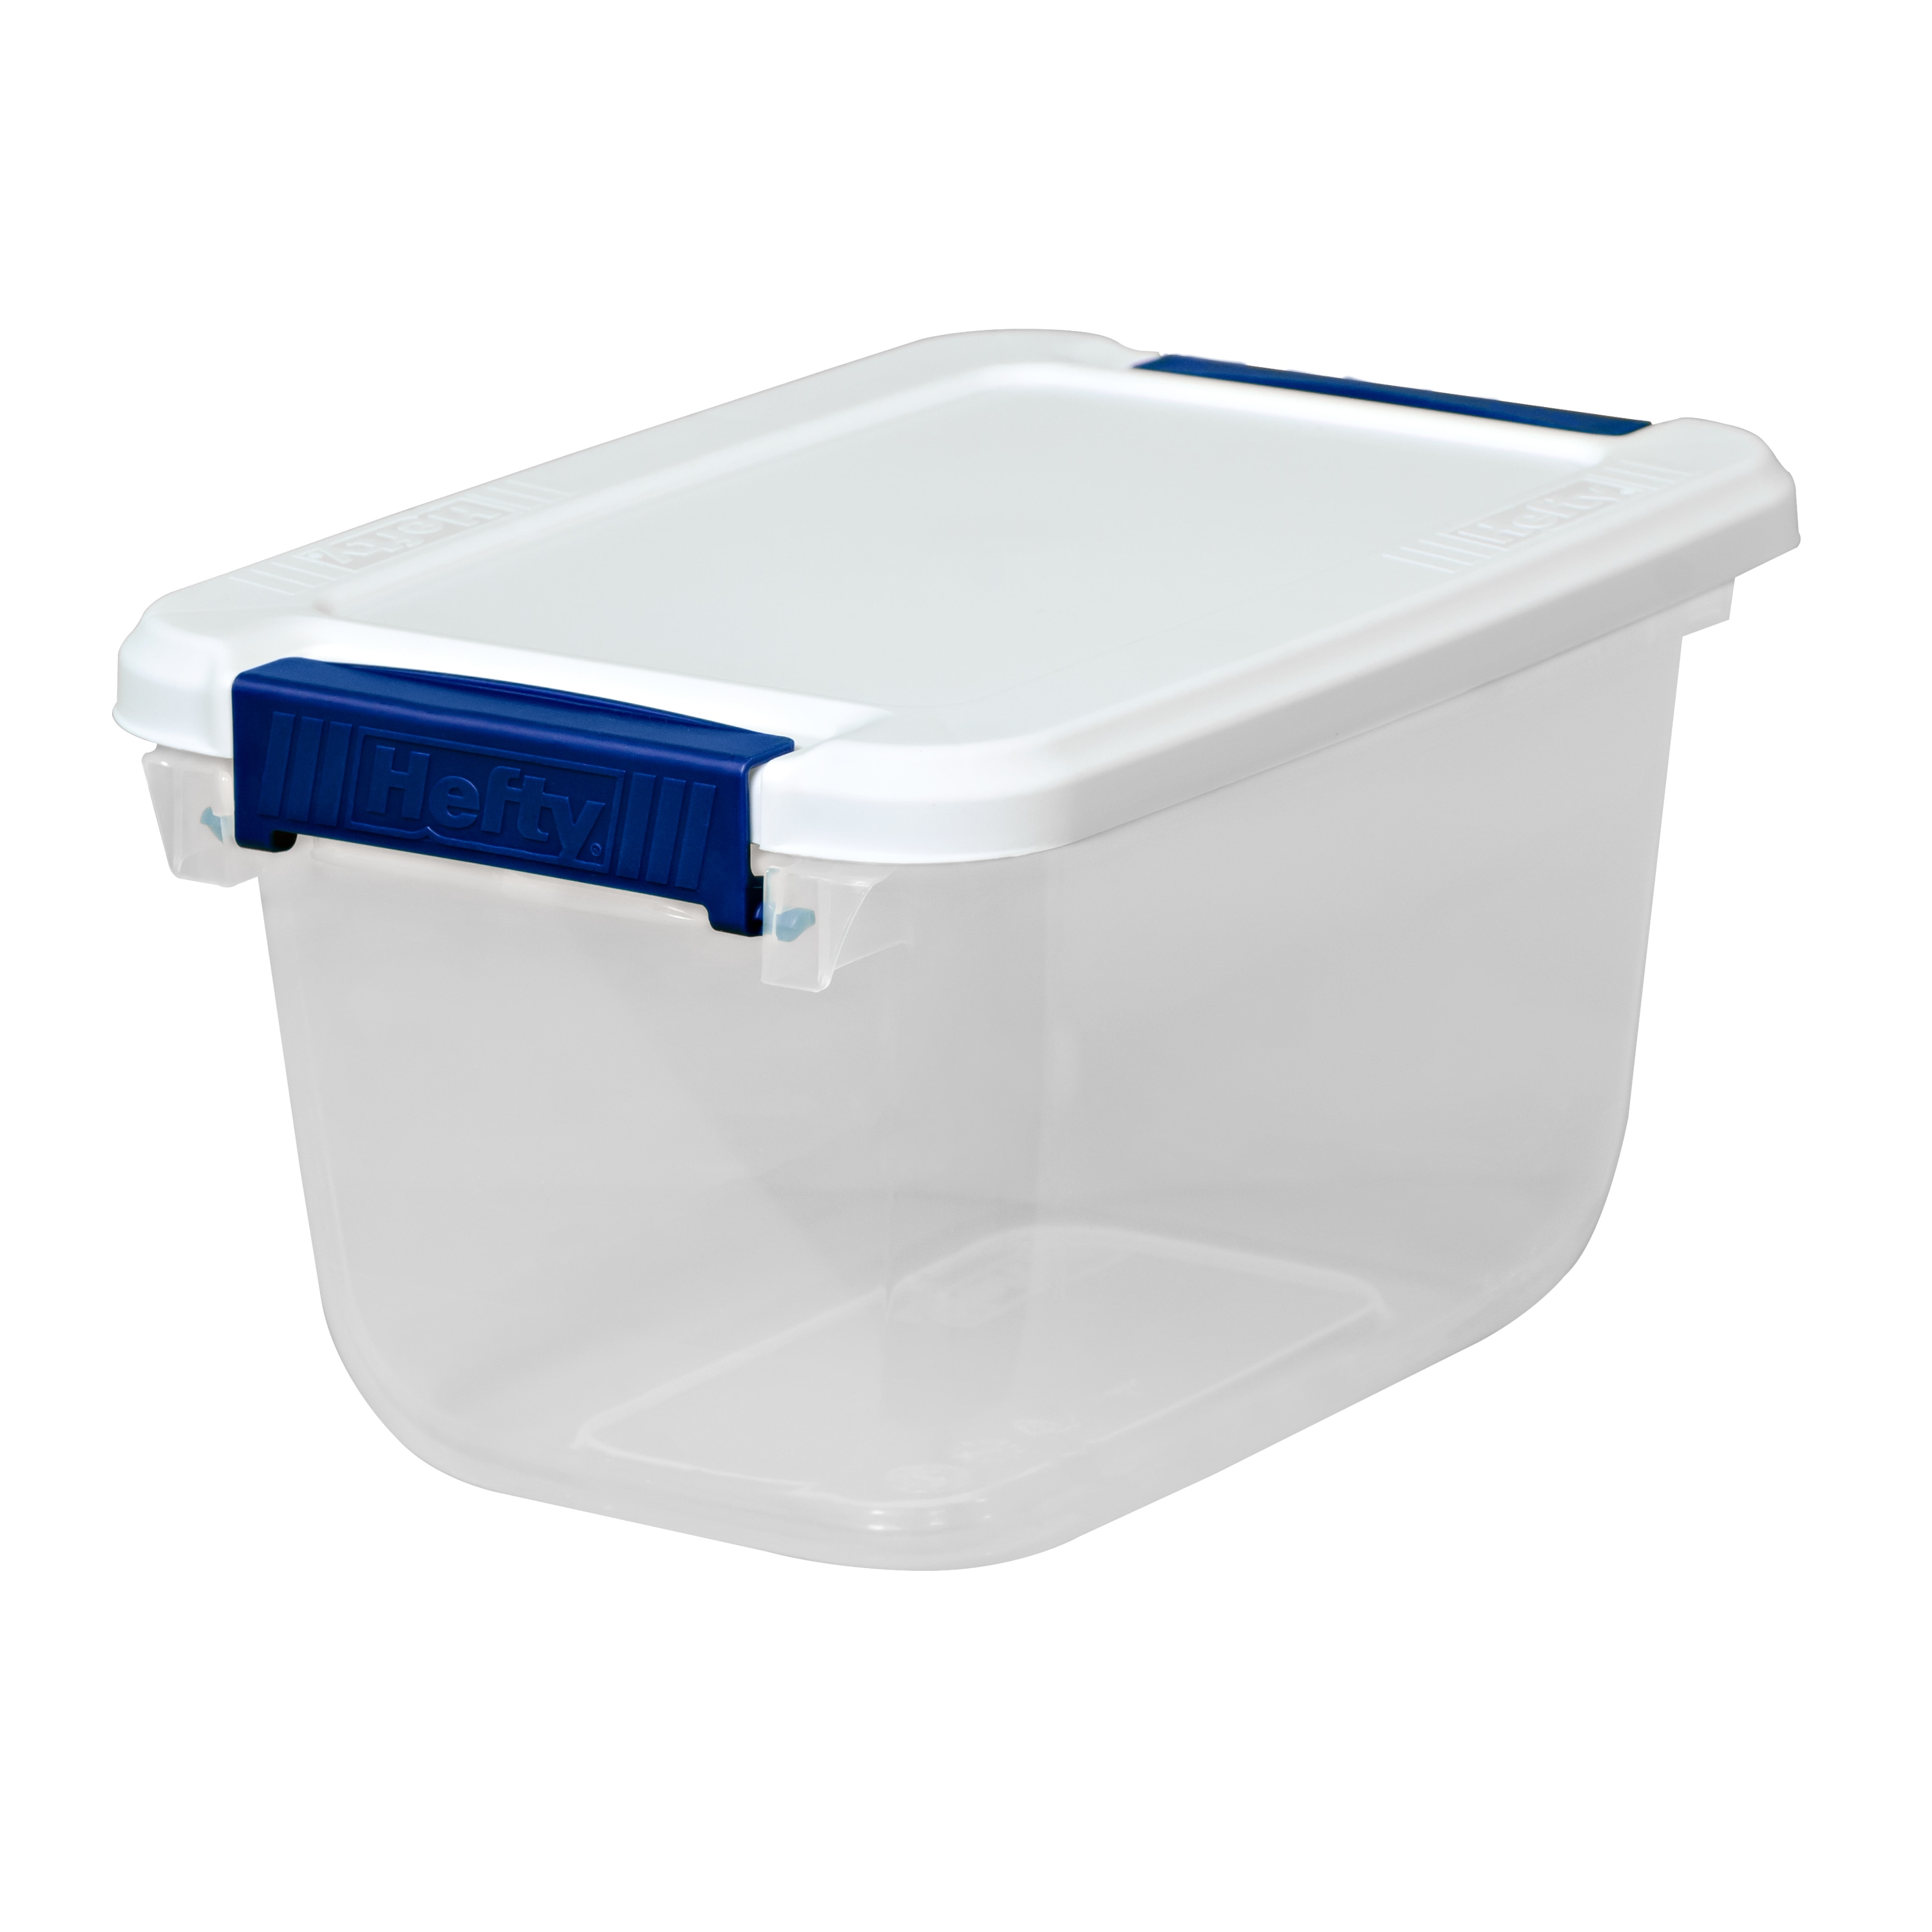 Hefty HI-RISE Clear Plastic Bin with Smoke Blue Lid (6 Pack) - 72 qt  Storage Container with Lid, Ideal Space Saver for Closet Shoe Storage Bins  and